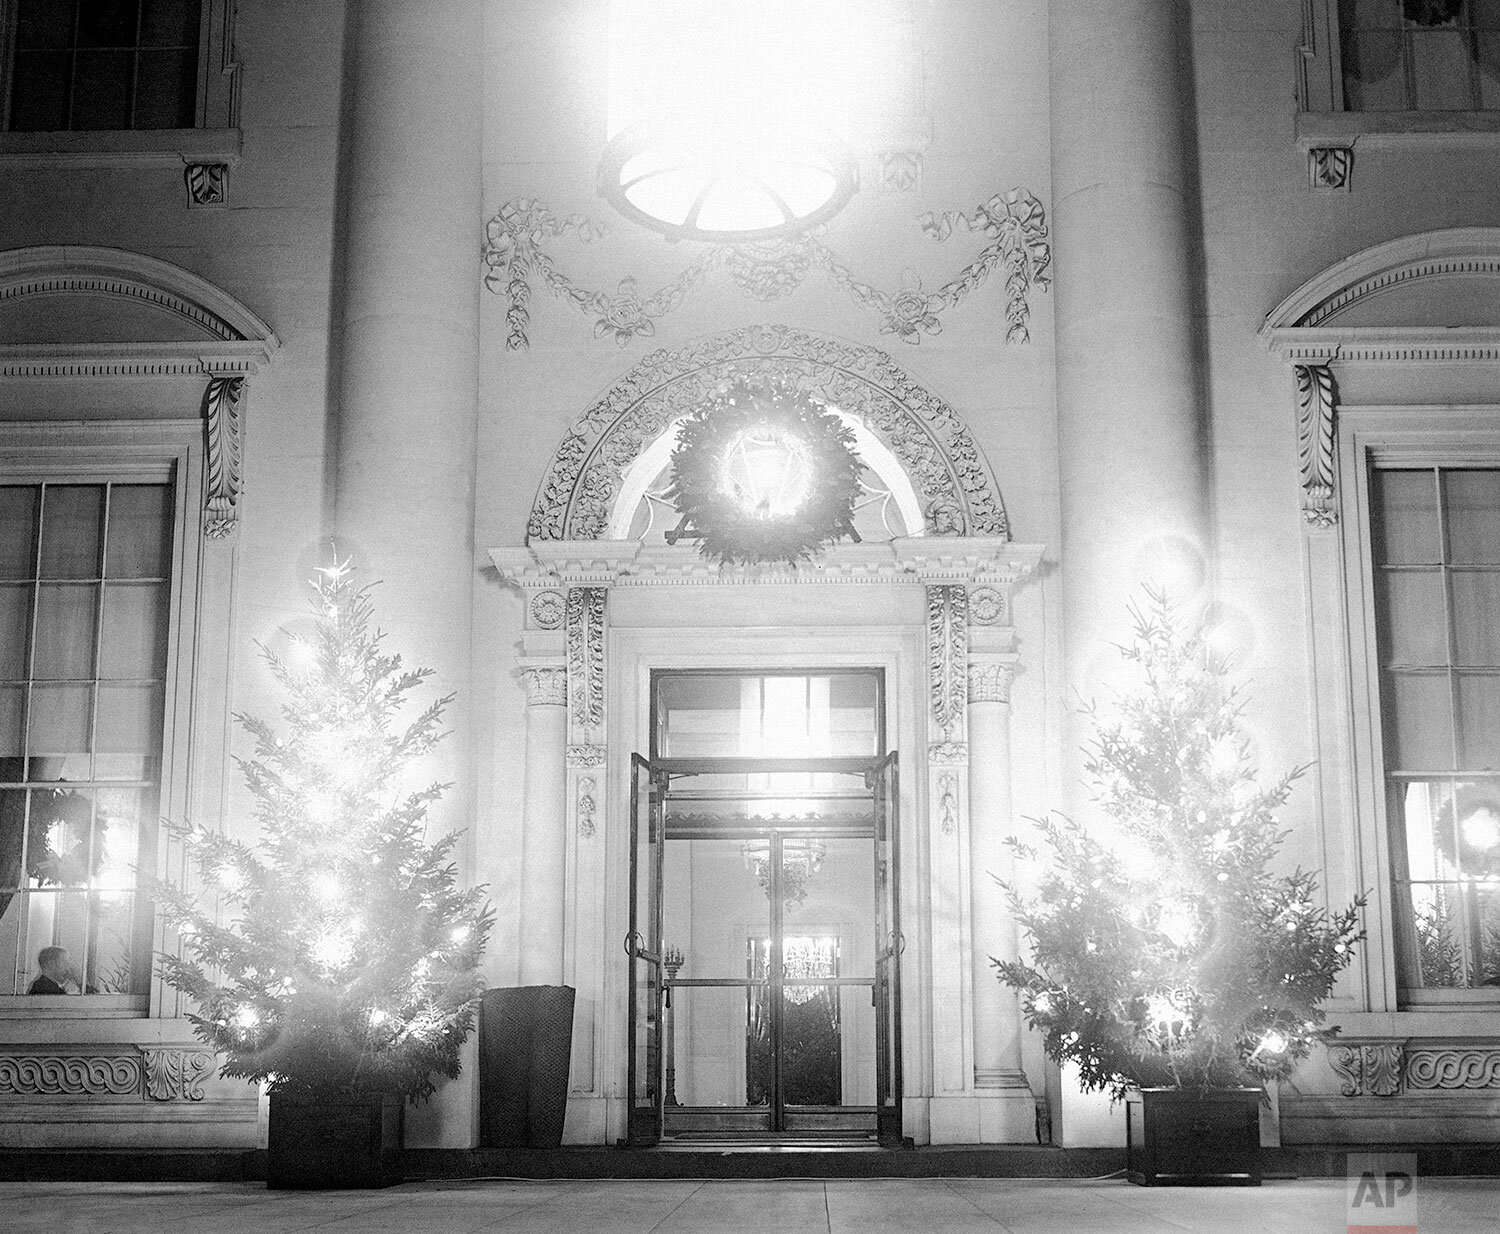  Lighted Christmas trees in front of the portals of the White House in Washington on Dec. 25, 1931. (AP Photo) 